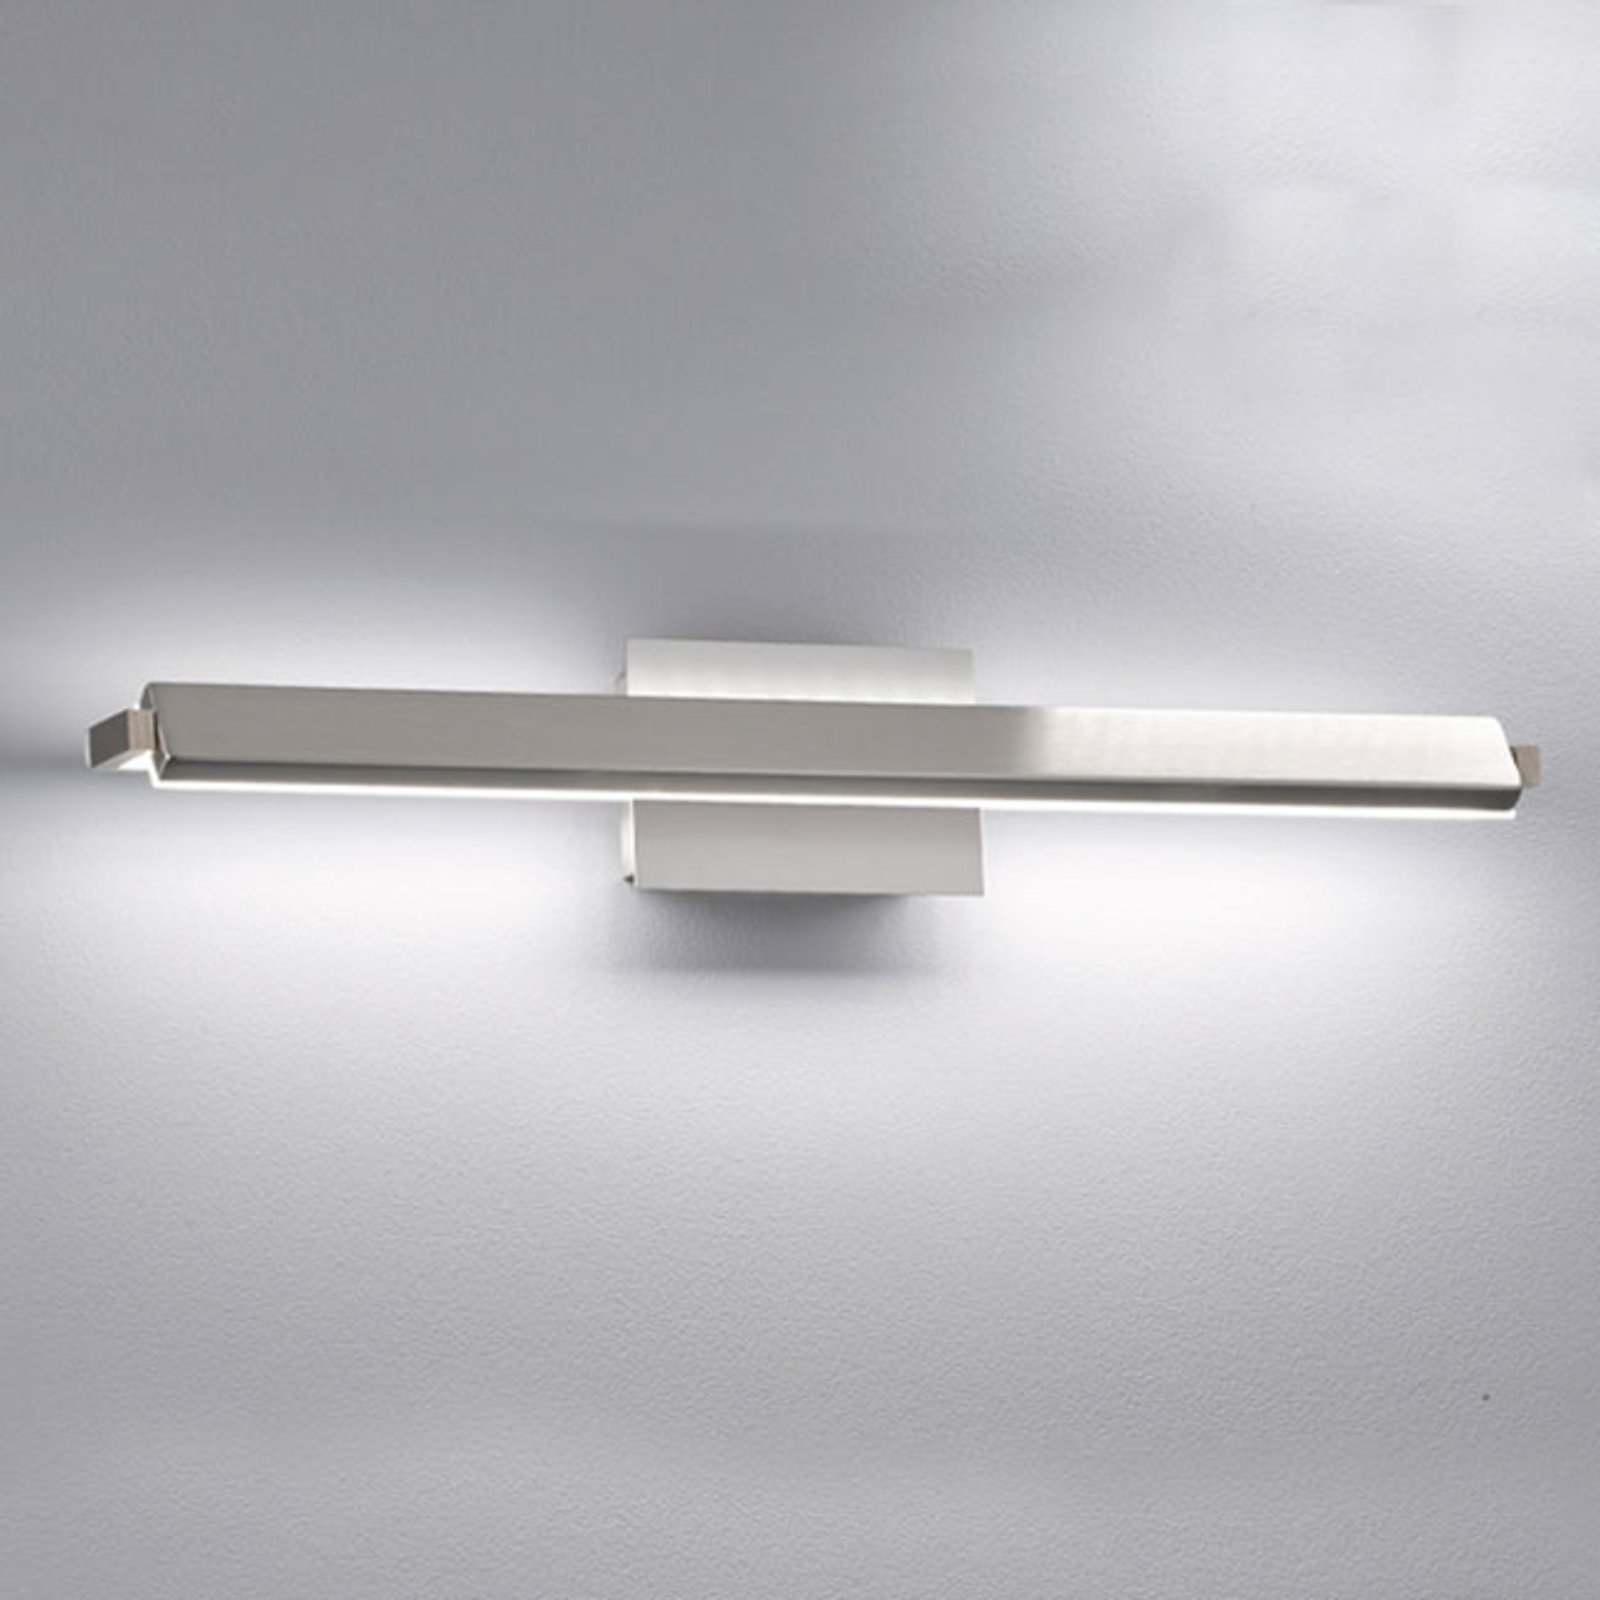 Pare TW LED wall lamp, dimmer 60 cm | Lights.co.uk